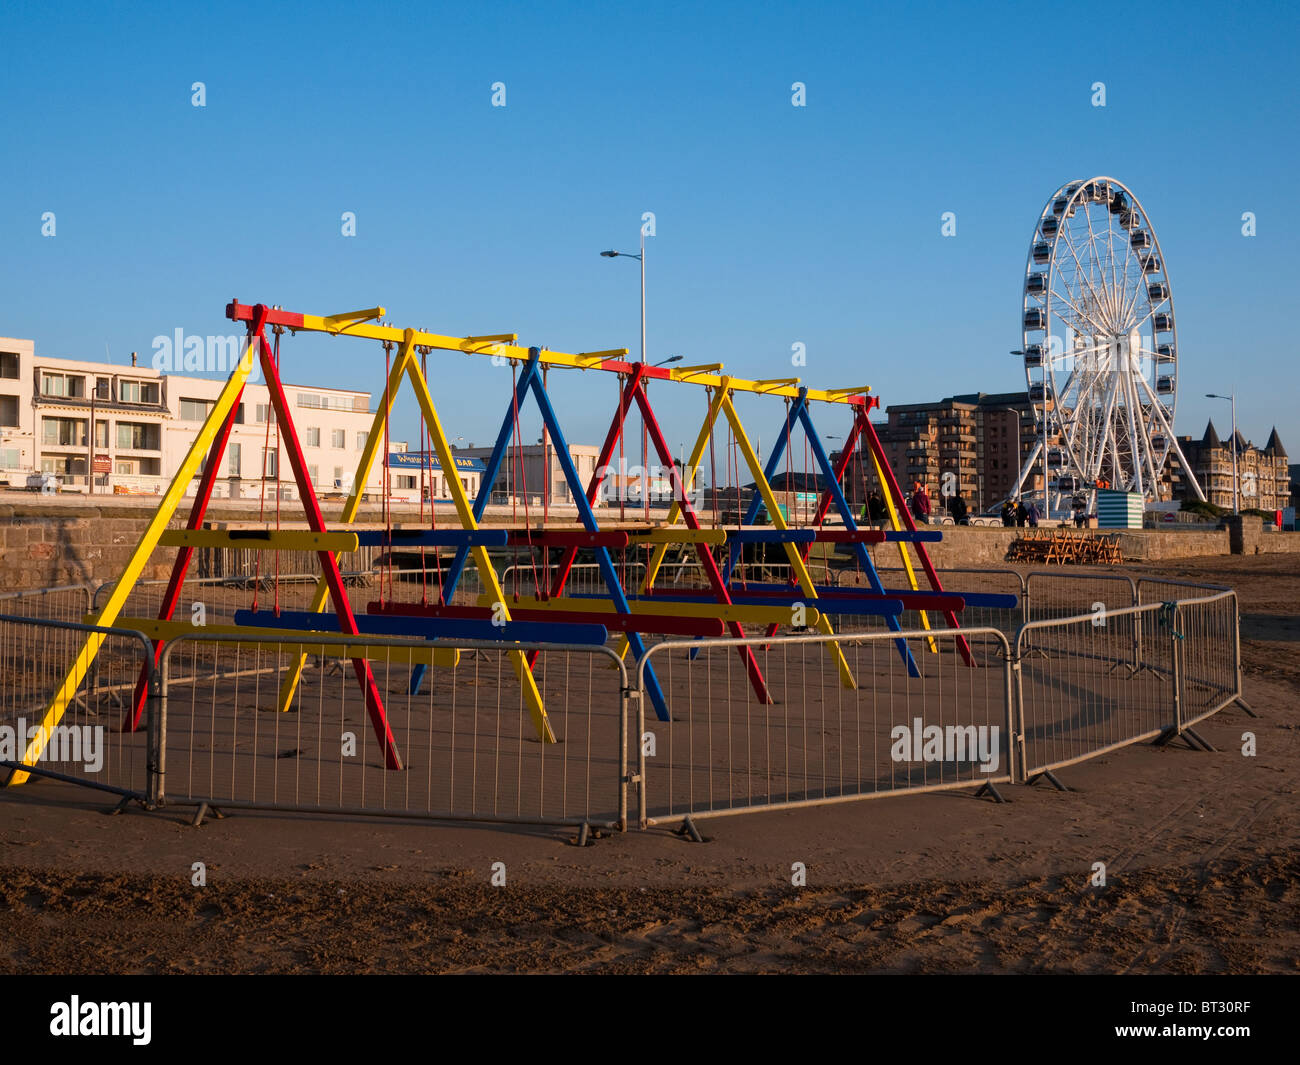 Children's swings and the Wheel of Weston on the seafront of Weston-super-Mare at sunset, North Somerset, England. Stock Photo